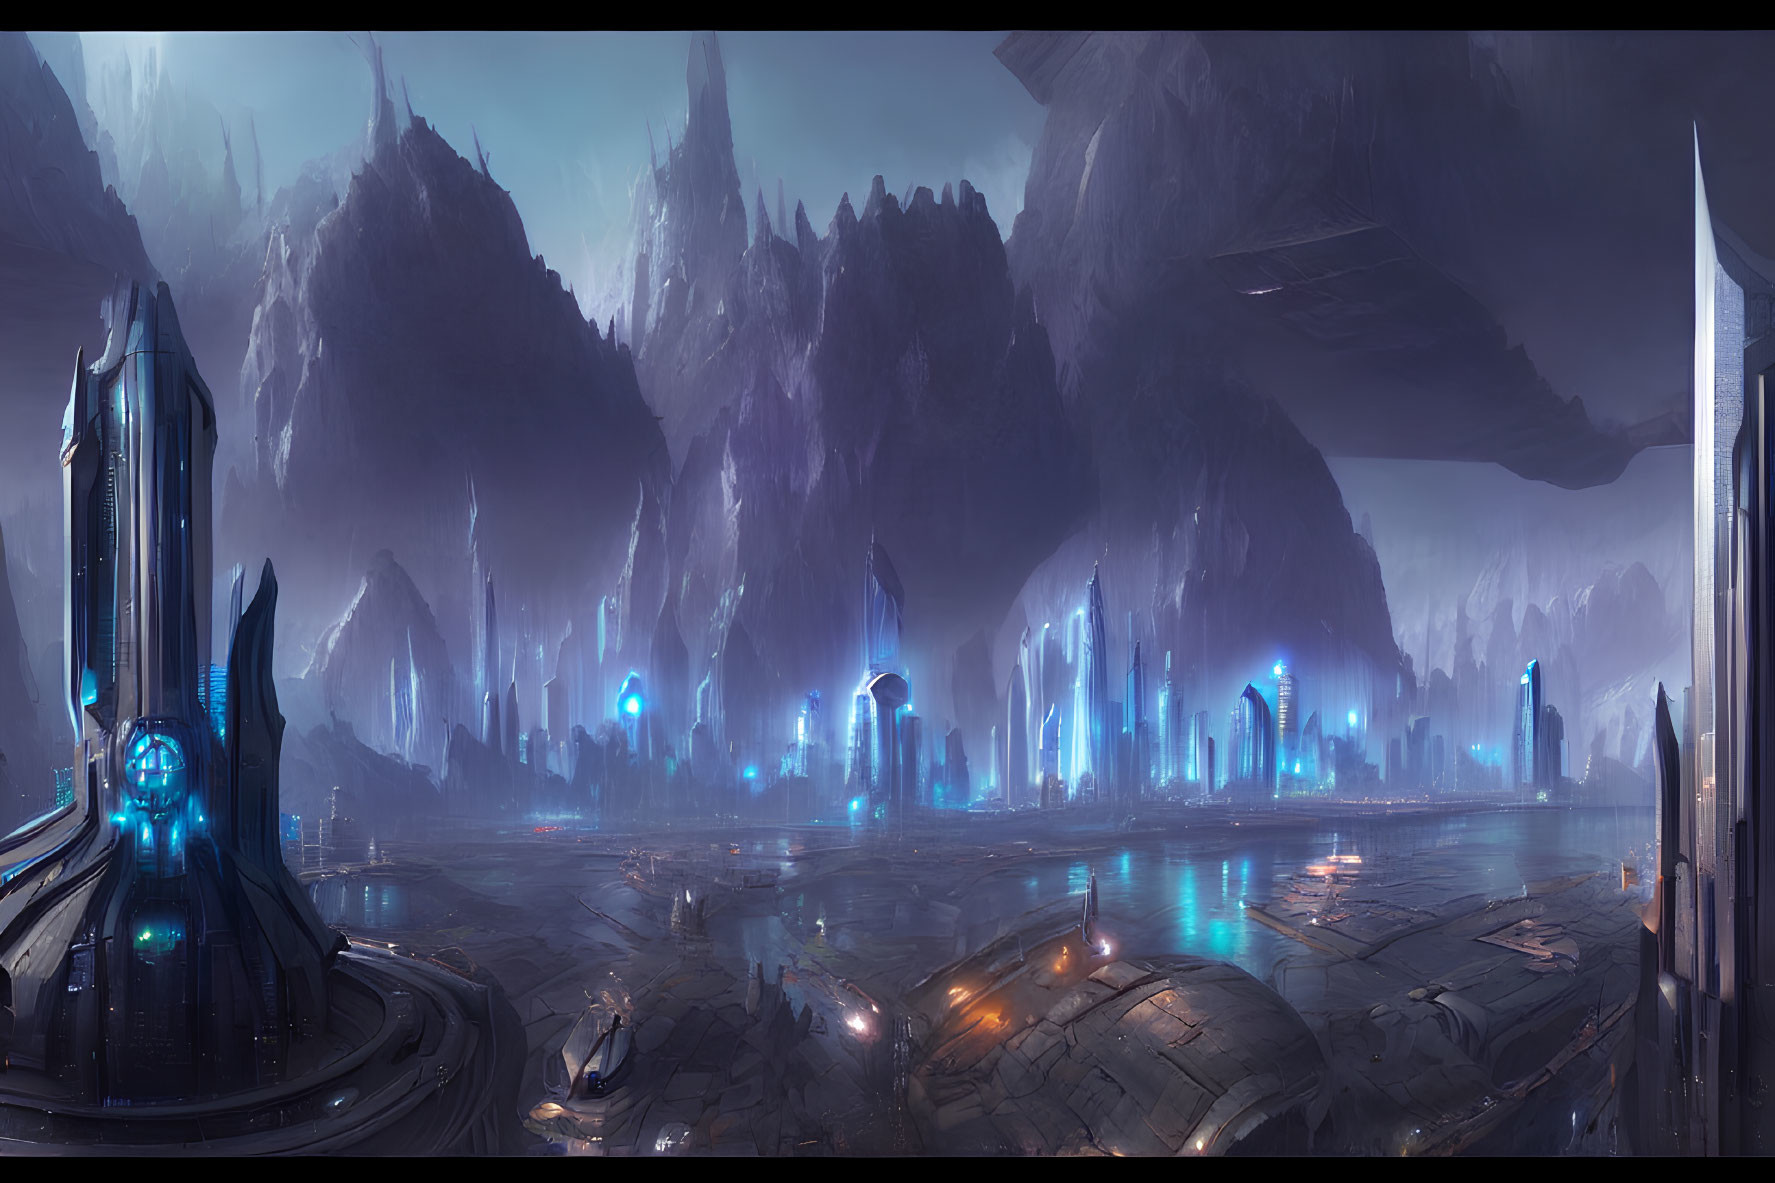 Futuristic cityscape with towering spires and glowing lights against mountain backdrop